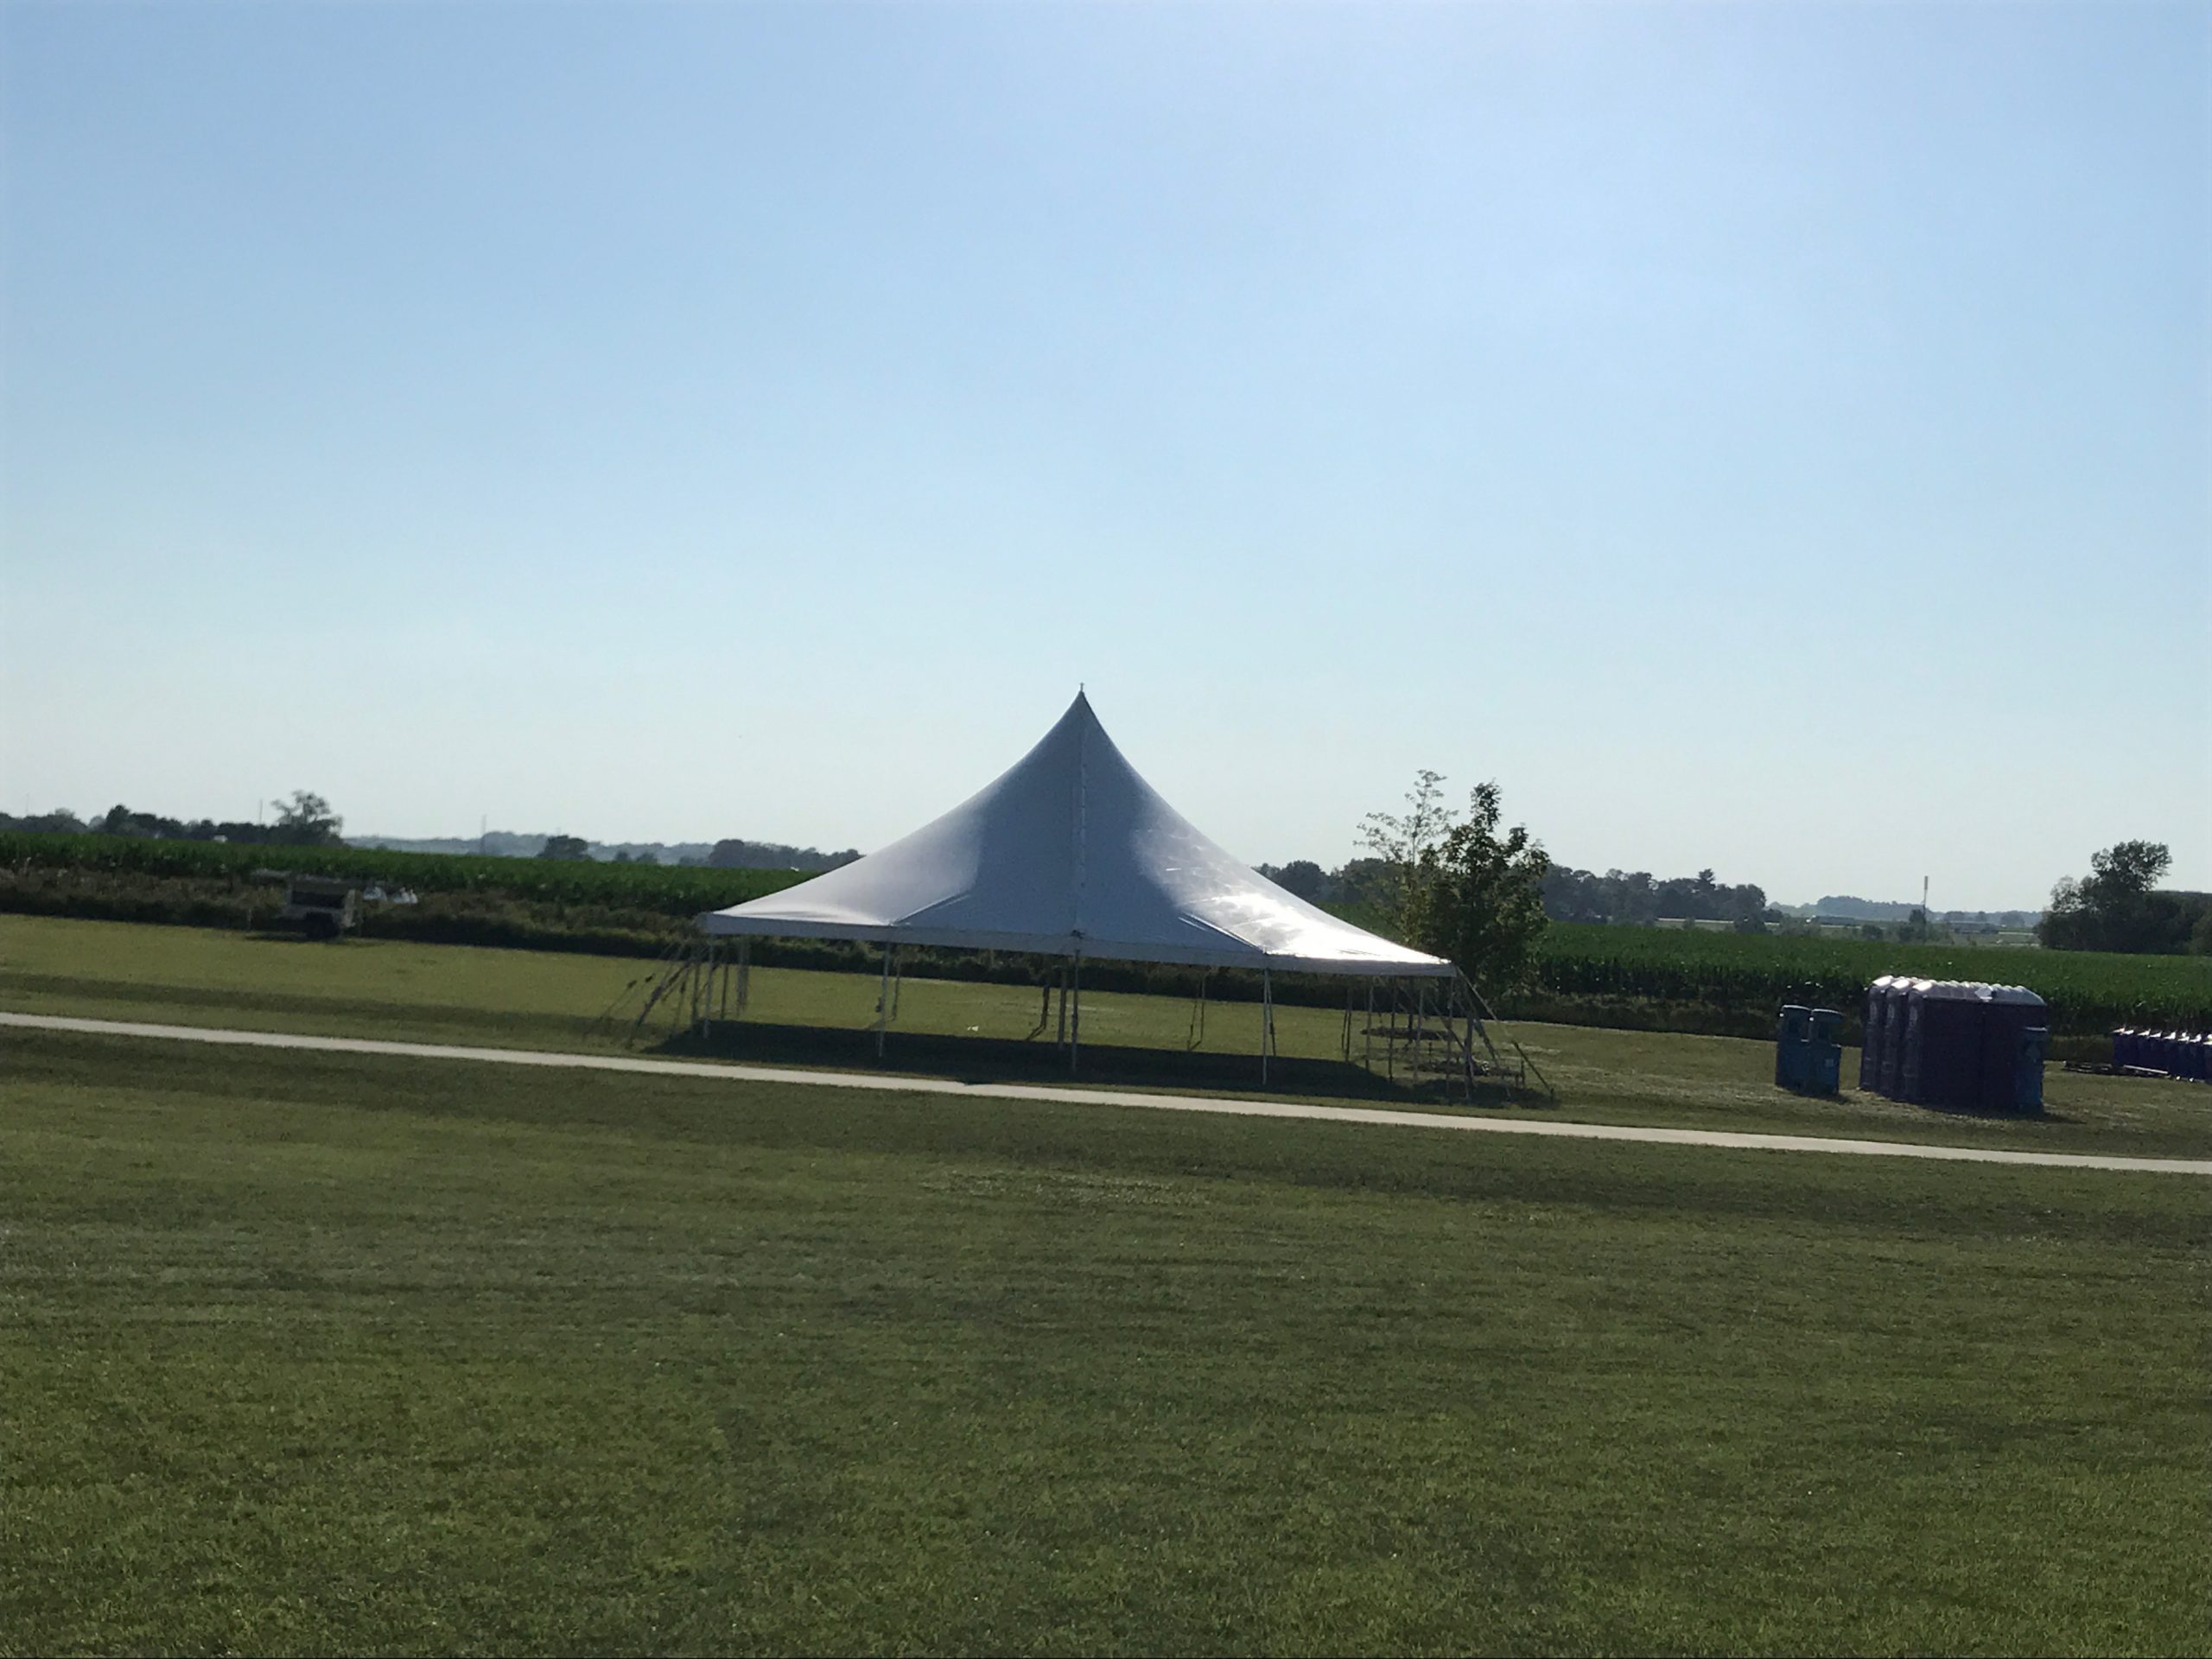 One 40' x 40' rope and pole tent at the North Liberty Blues & BBQ festival